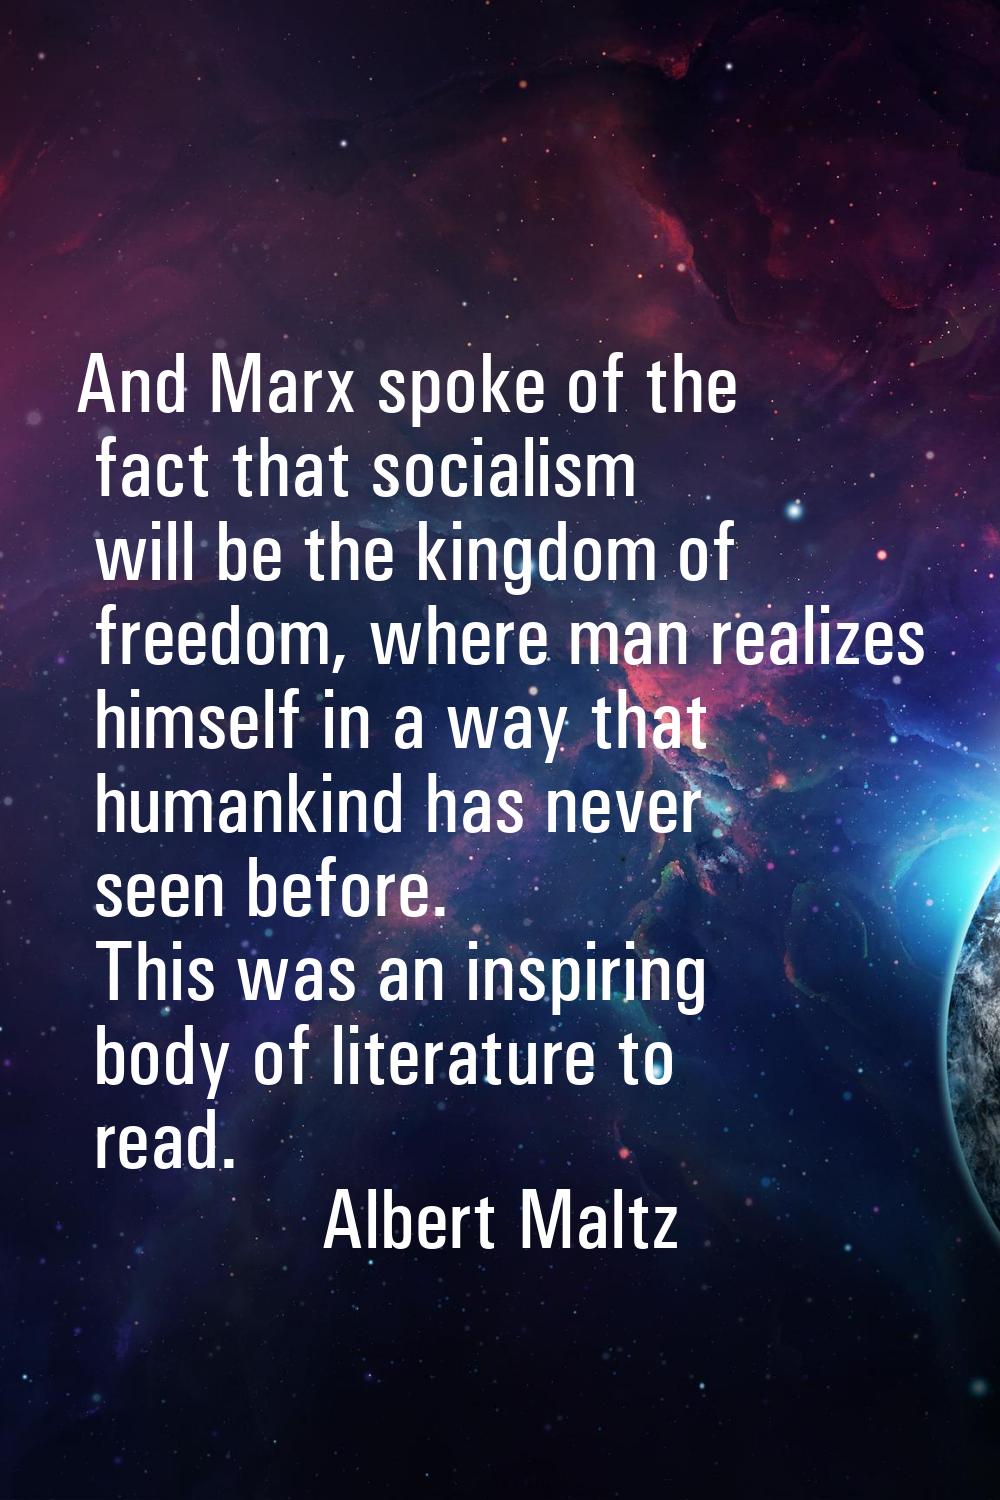 And Marx spoke of the fact that socialism will be the kingdom of freedom, where man realizes himsel